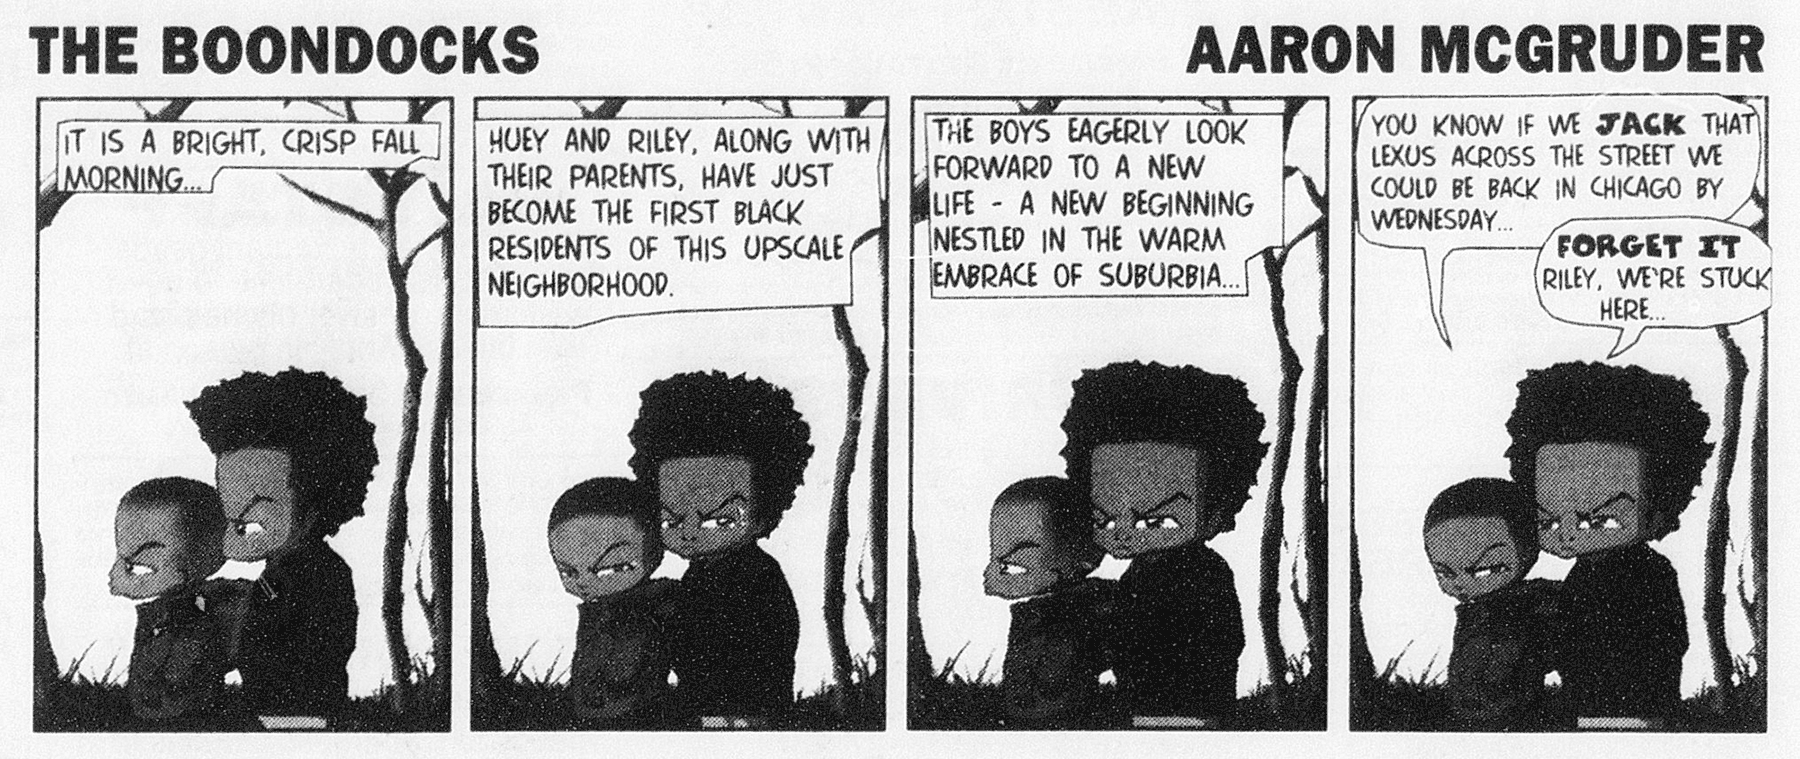 Huey and Riley, along with their parents, have just become the first black ...